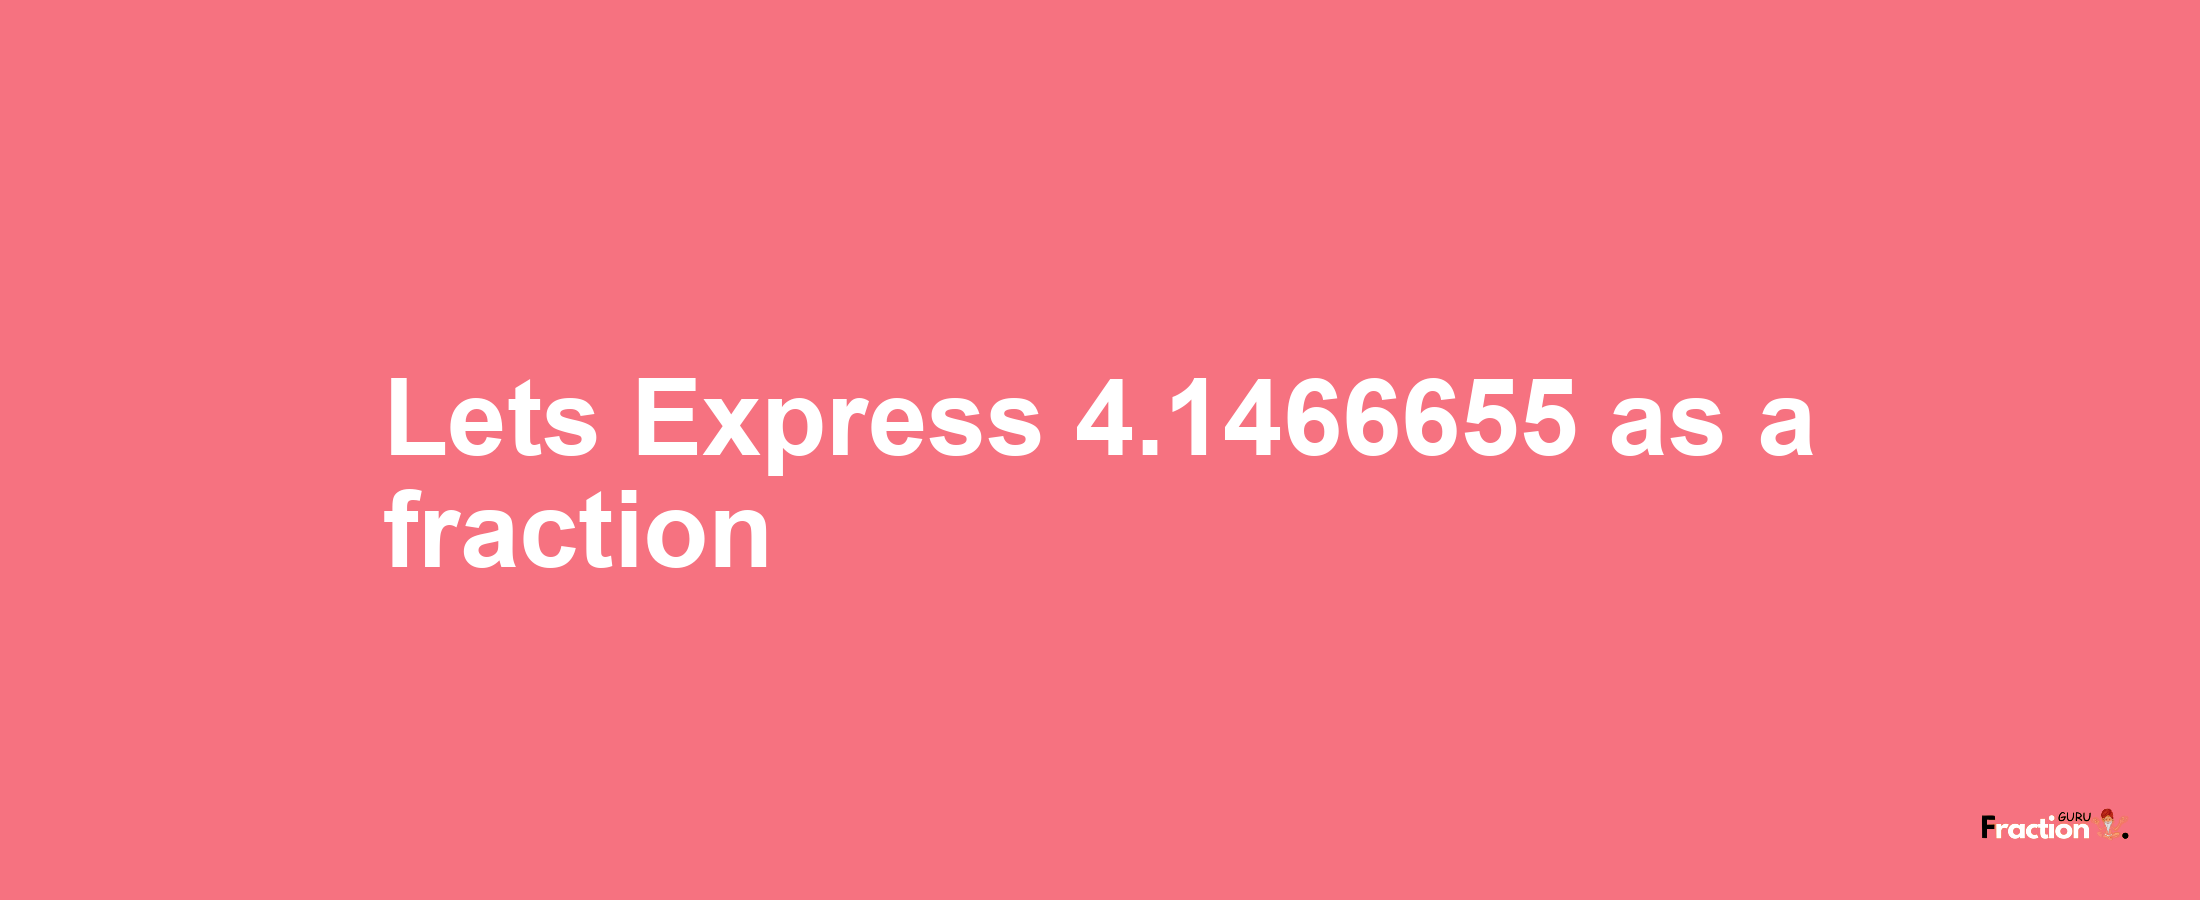 Lets Express 4.1466655 as afraction